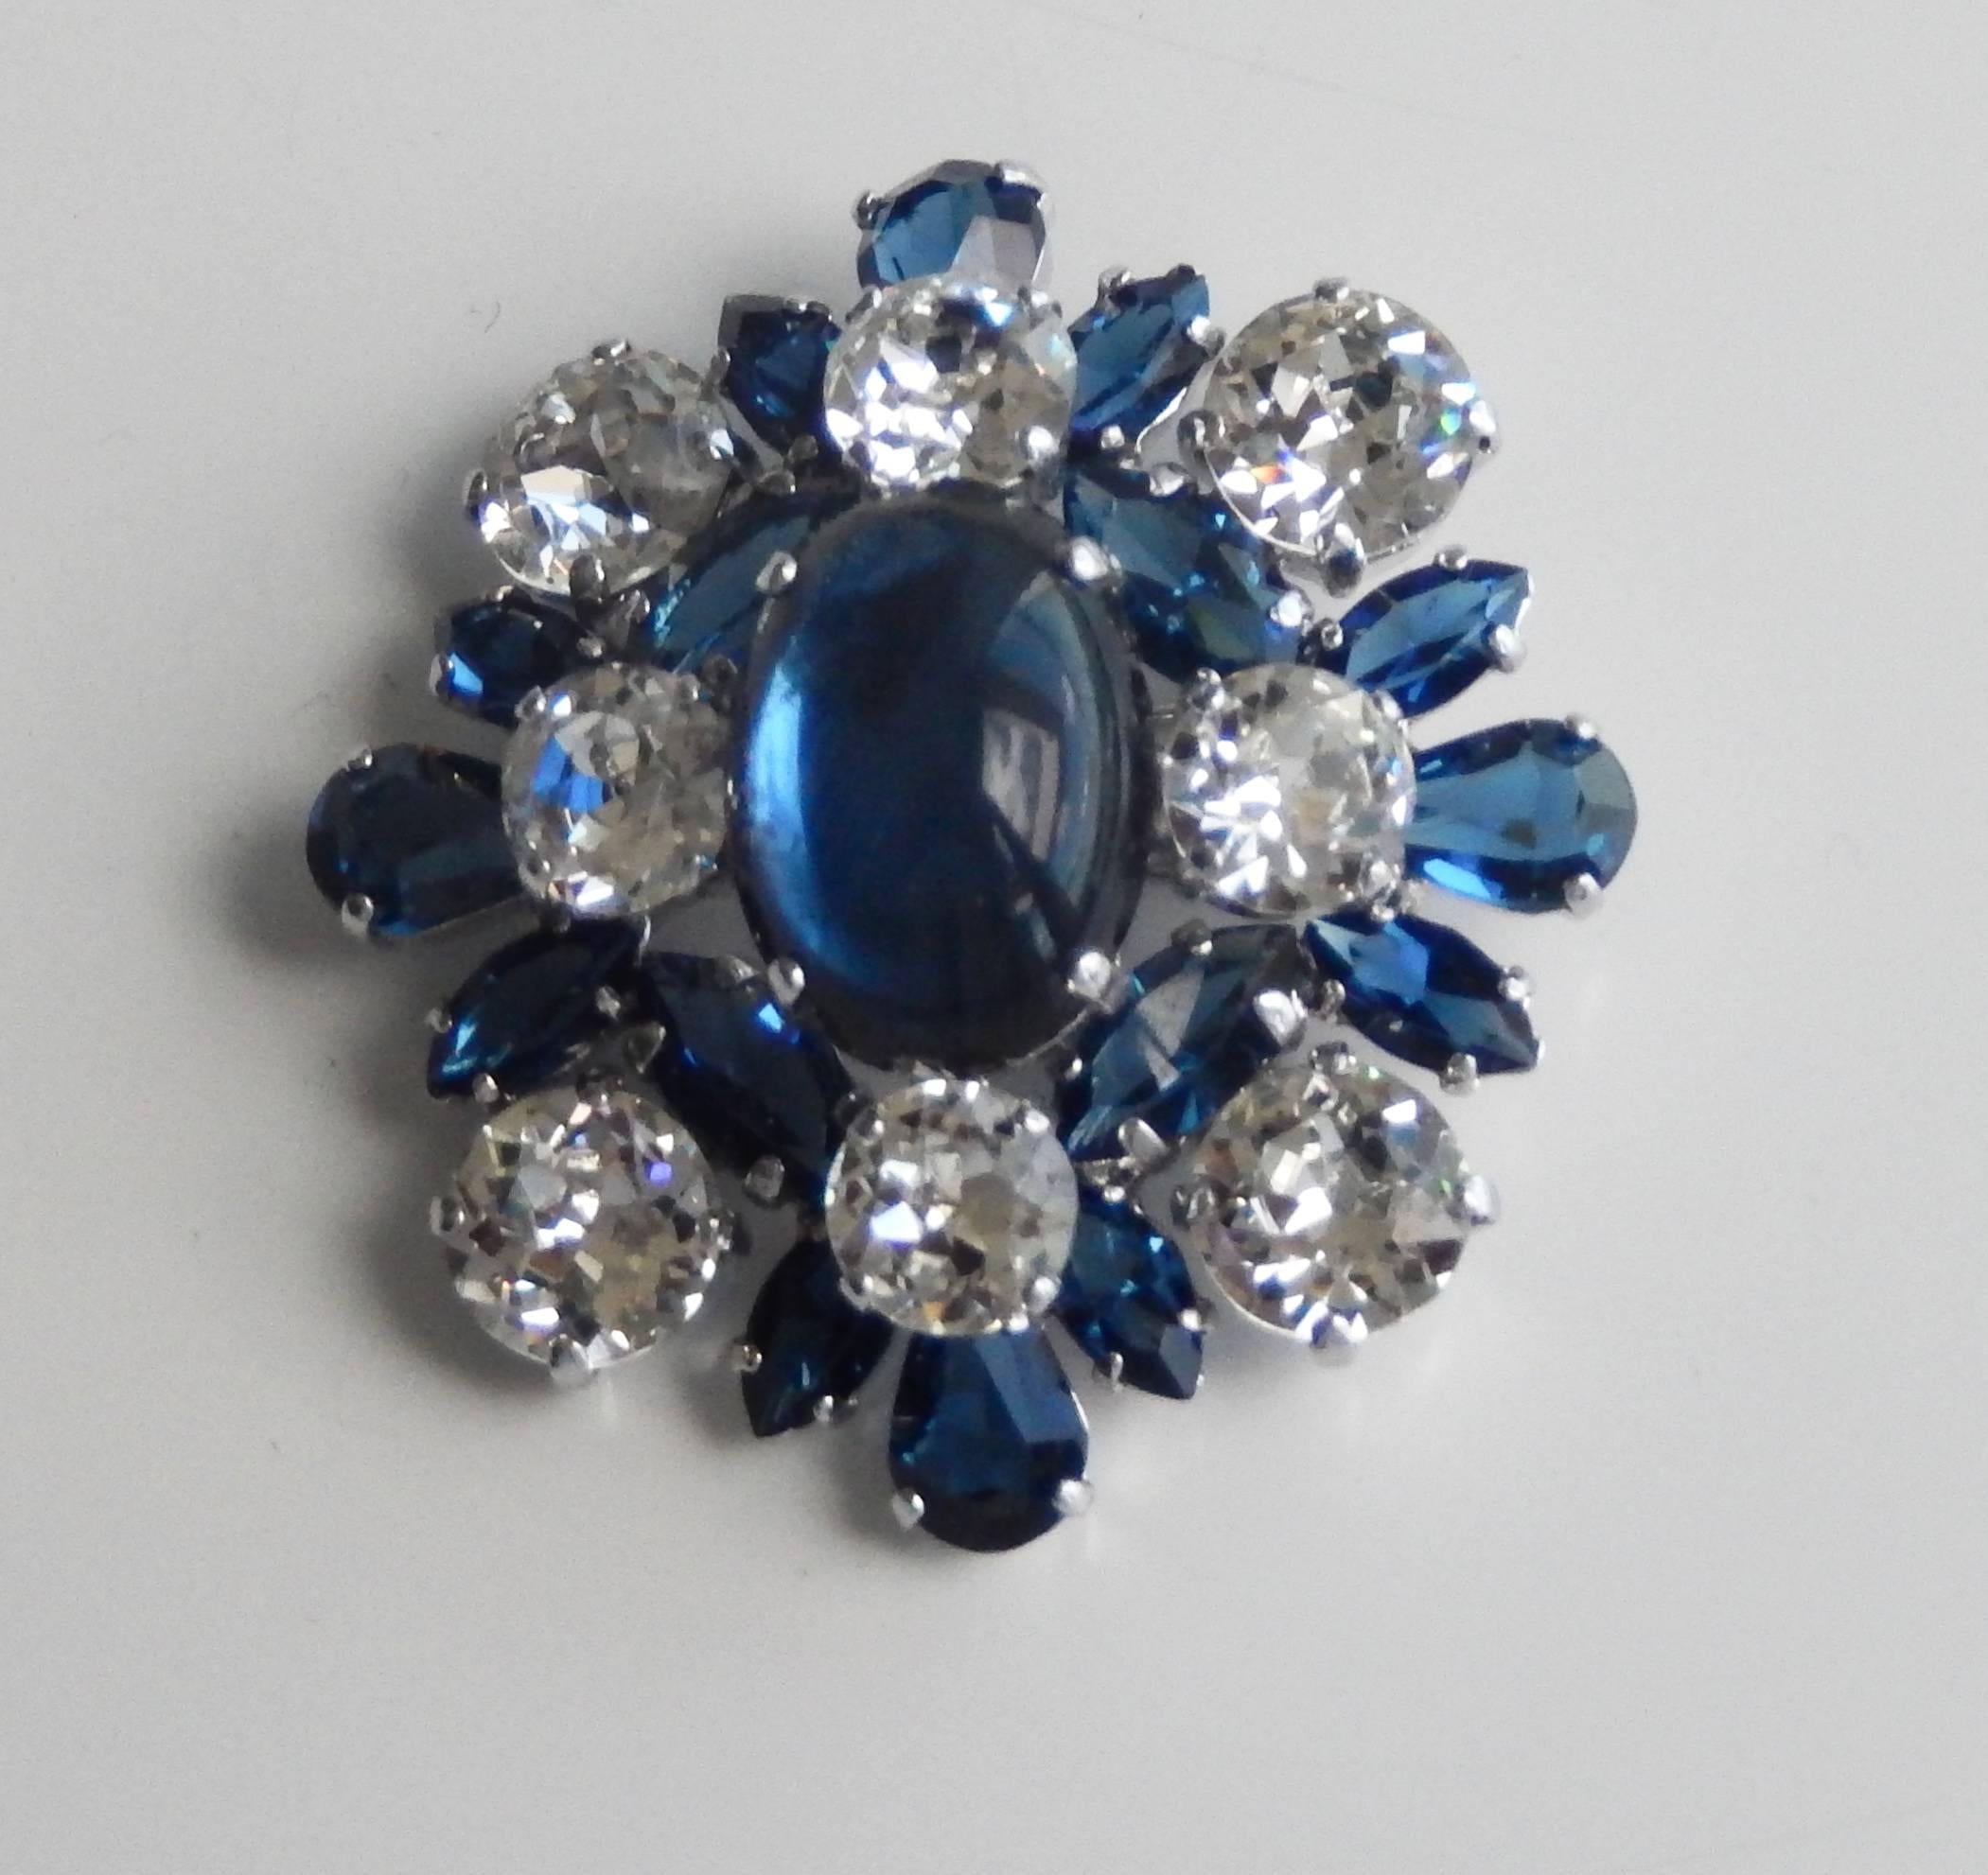 An elegant brooch by Christian Dior from the fifties. A large cabochon, faux sapphire is surrounded by faux diamonds. Dated and signed on the back of the pin.  It is rare to find Dior jewelry from this early period in such fine condition.  A